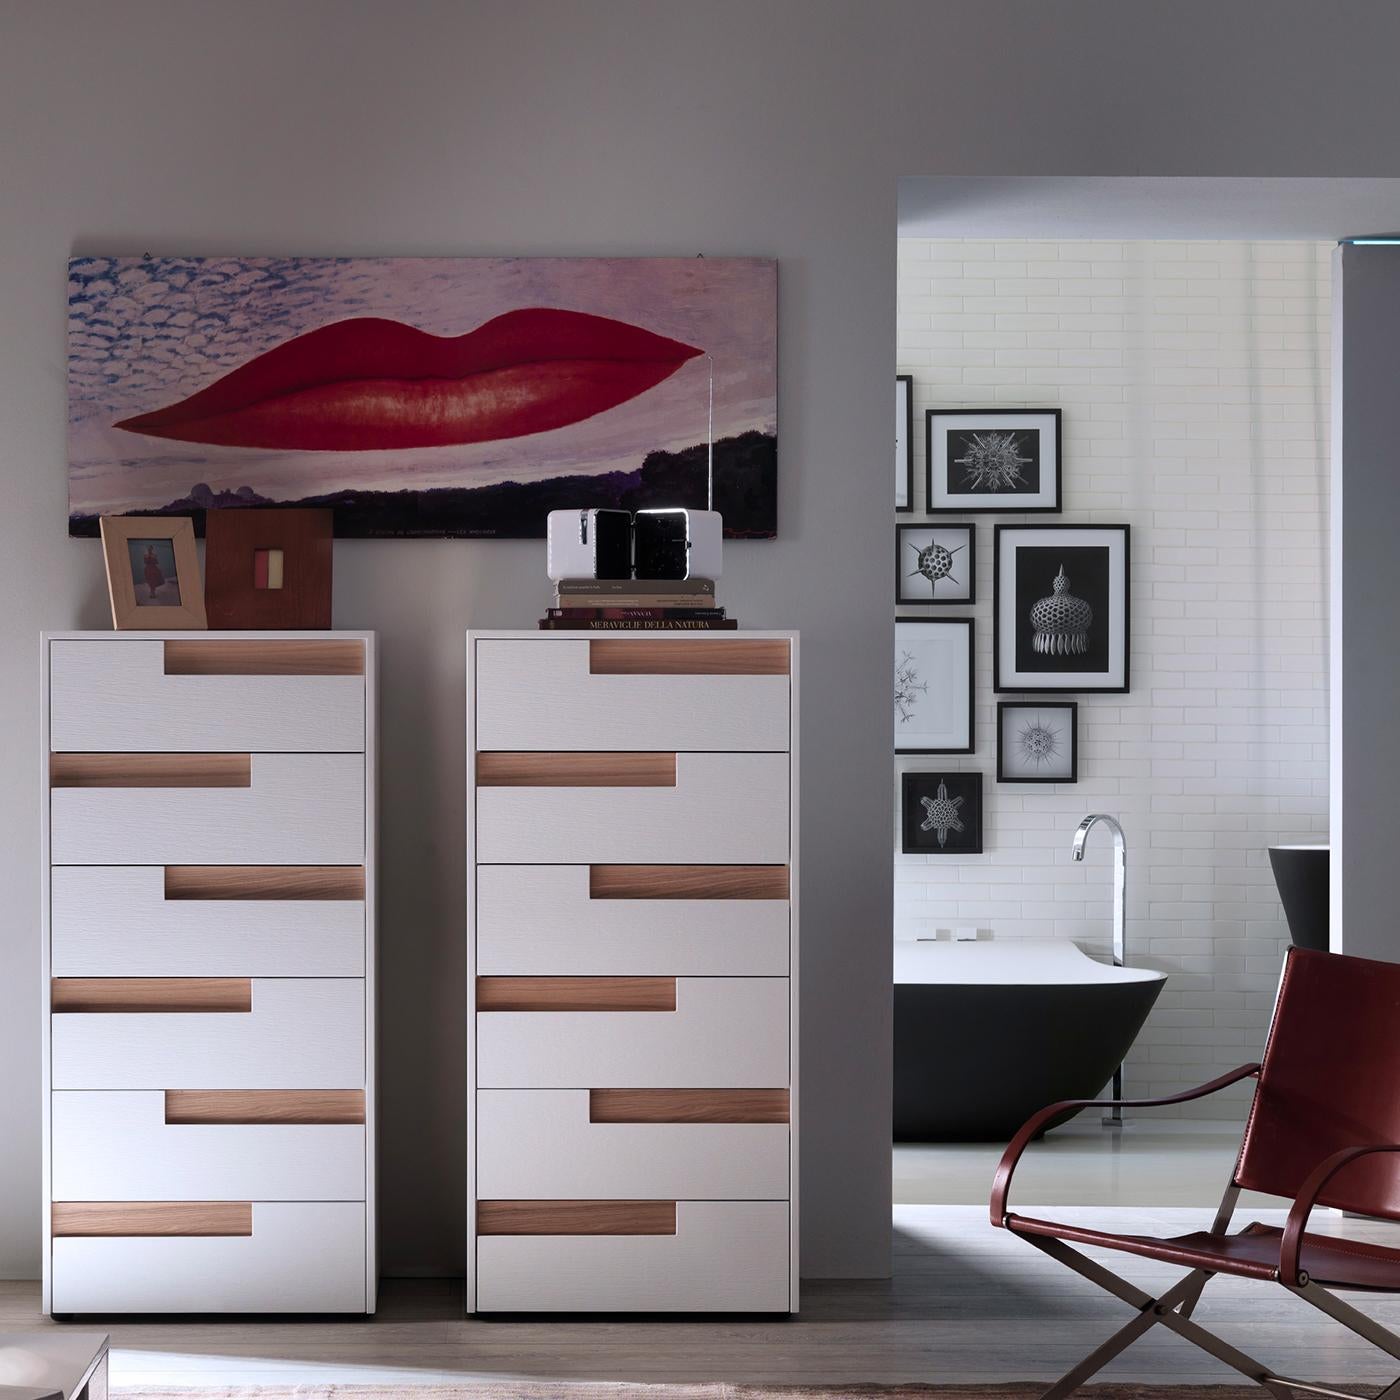 A textural decorative addition on a modern wall, this tall dresser is both functional and eye-catching. Its wooden frame boats a white matte lacquered finish that strikingly contrasts with the natural color of the off-set durmast handle on each of